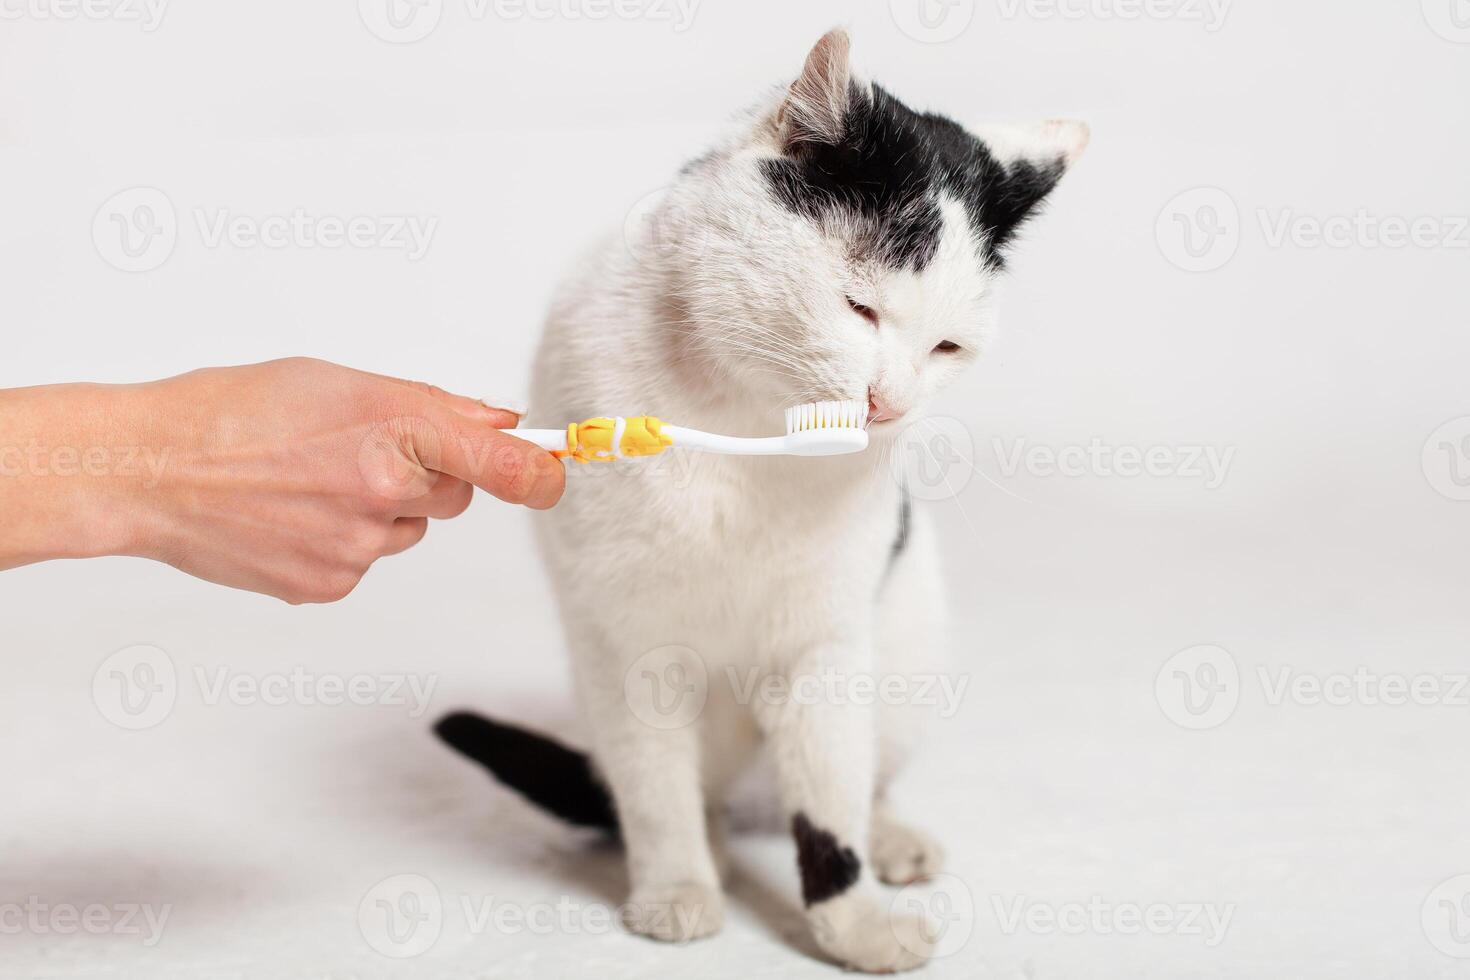 Black and white cat with yellow eyes is brushing teeth. Moldova, Bender, July 5, 2020, Bender Fortress, children's flat photo